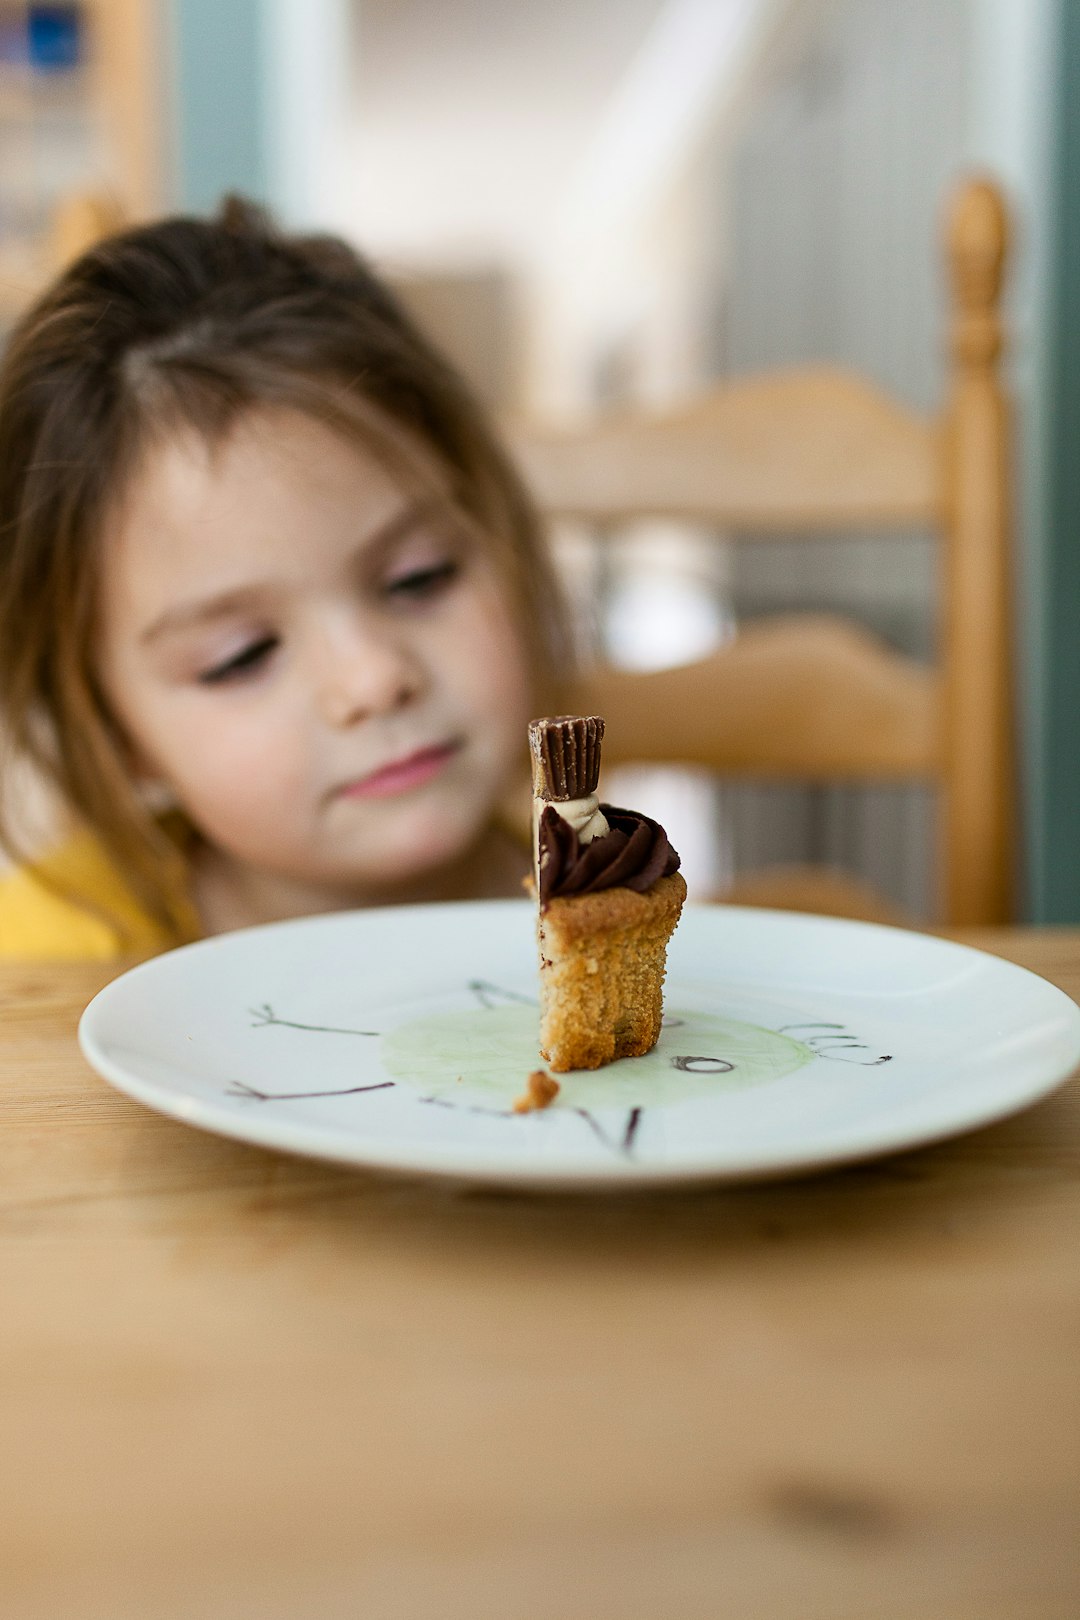 girl staring at the cake on plate